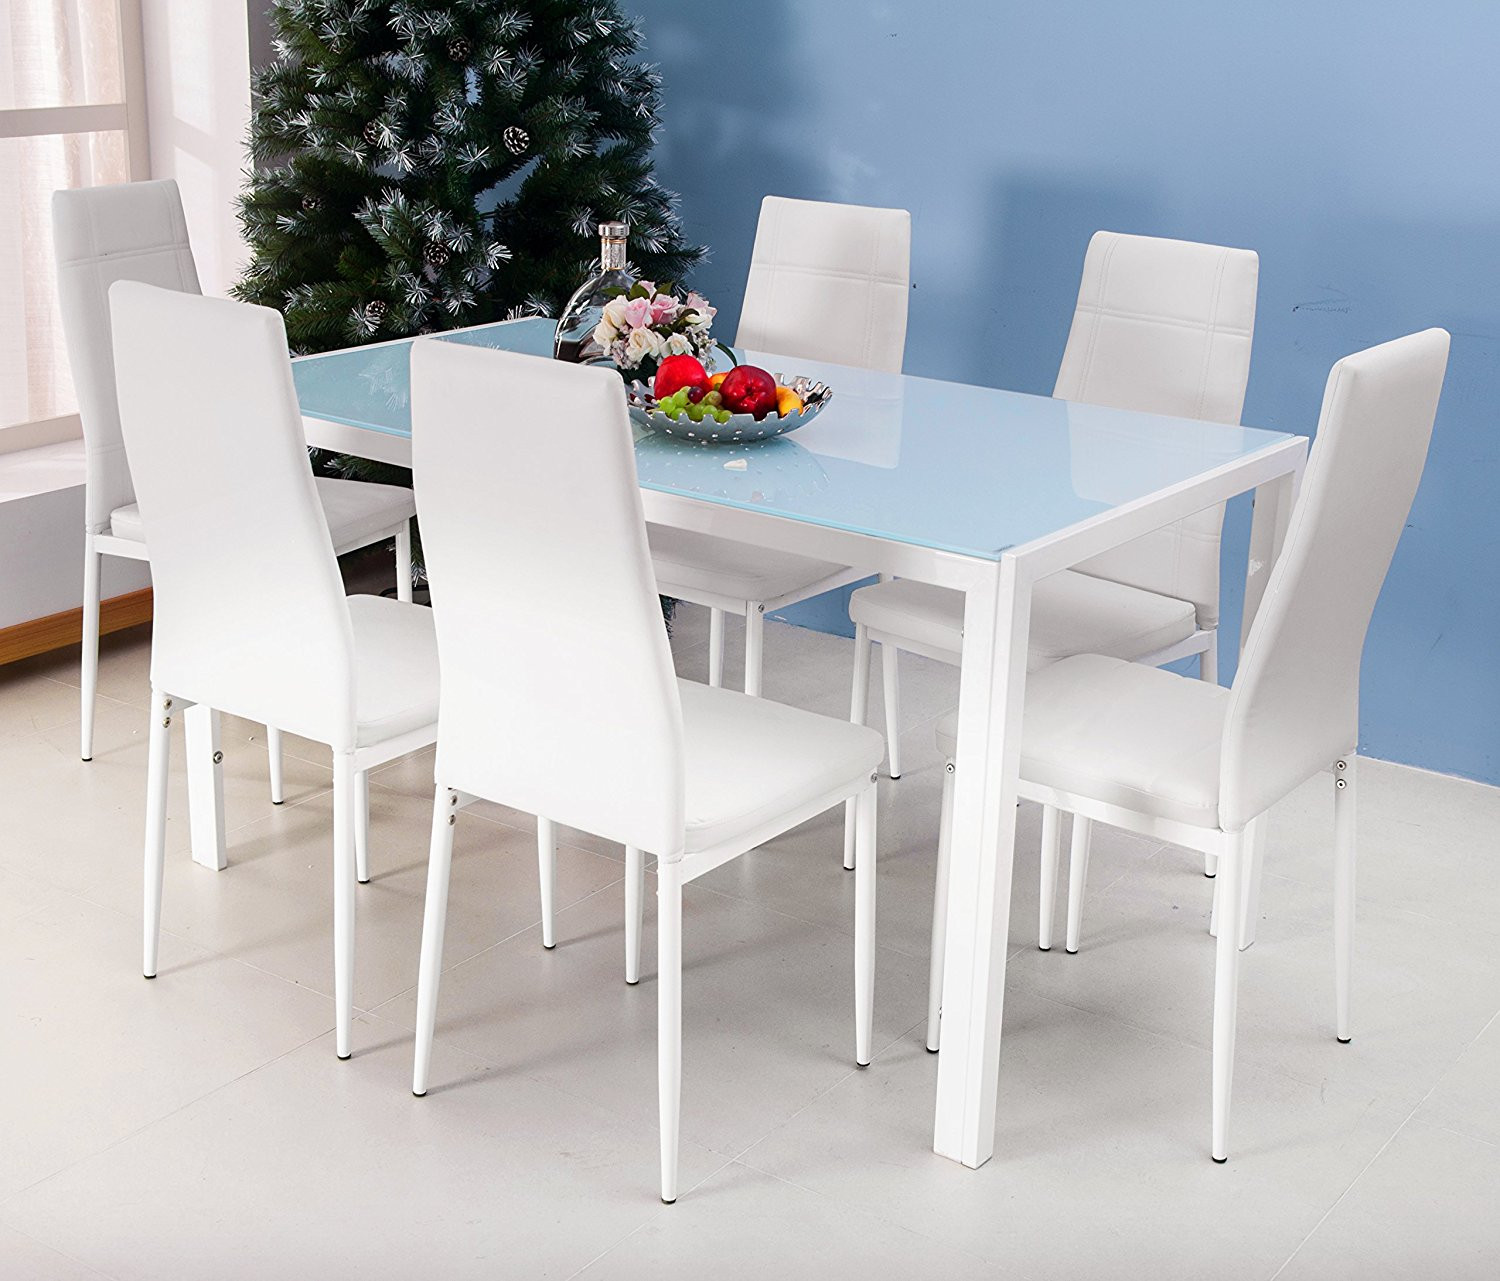 Modern Kitchen Chairs
 Spend Your Precious Time in White Dining Table and Chairs